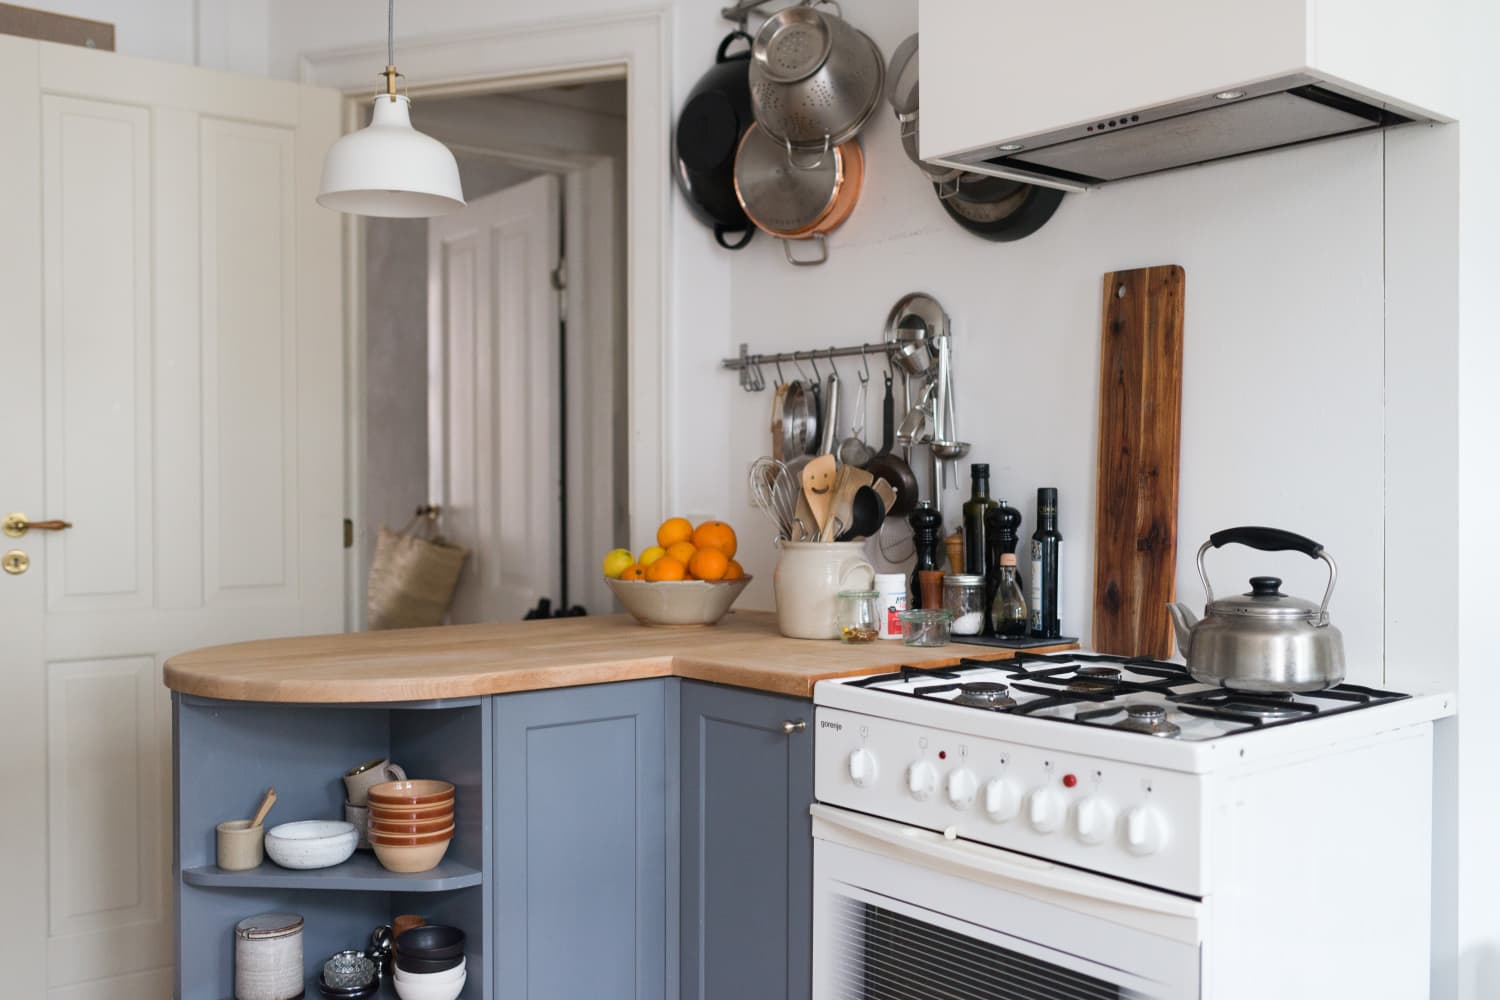 Small Kitchen Ideas To Steal (For Renter And Renovators) - Emily Henderson